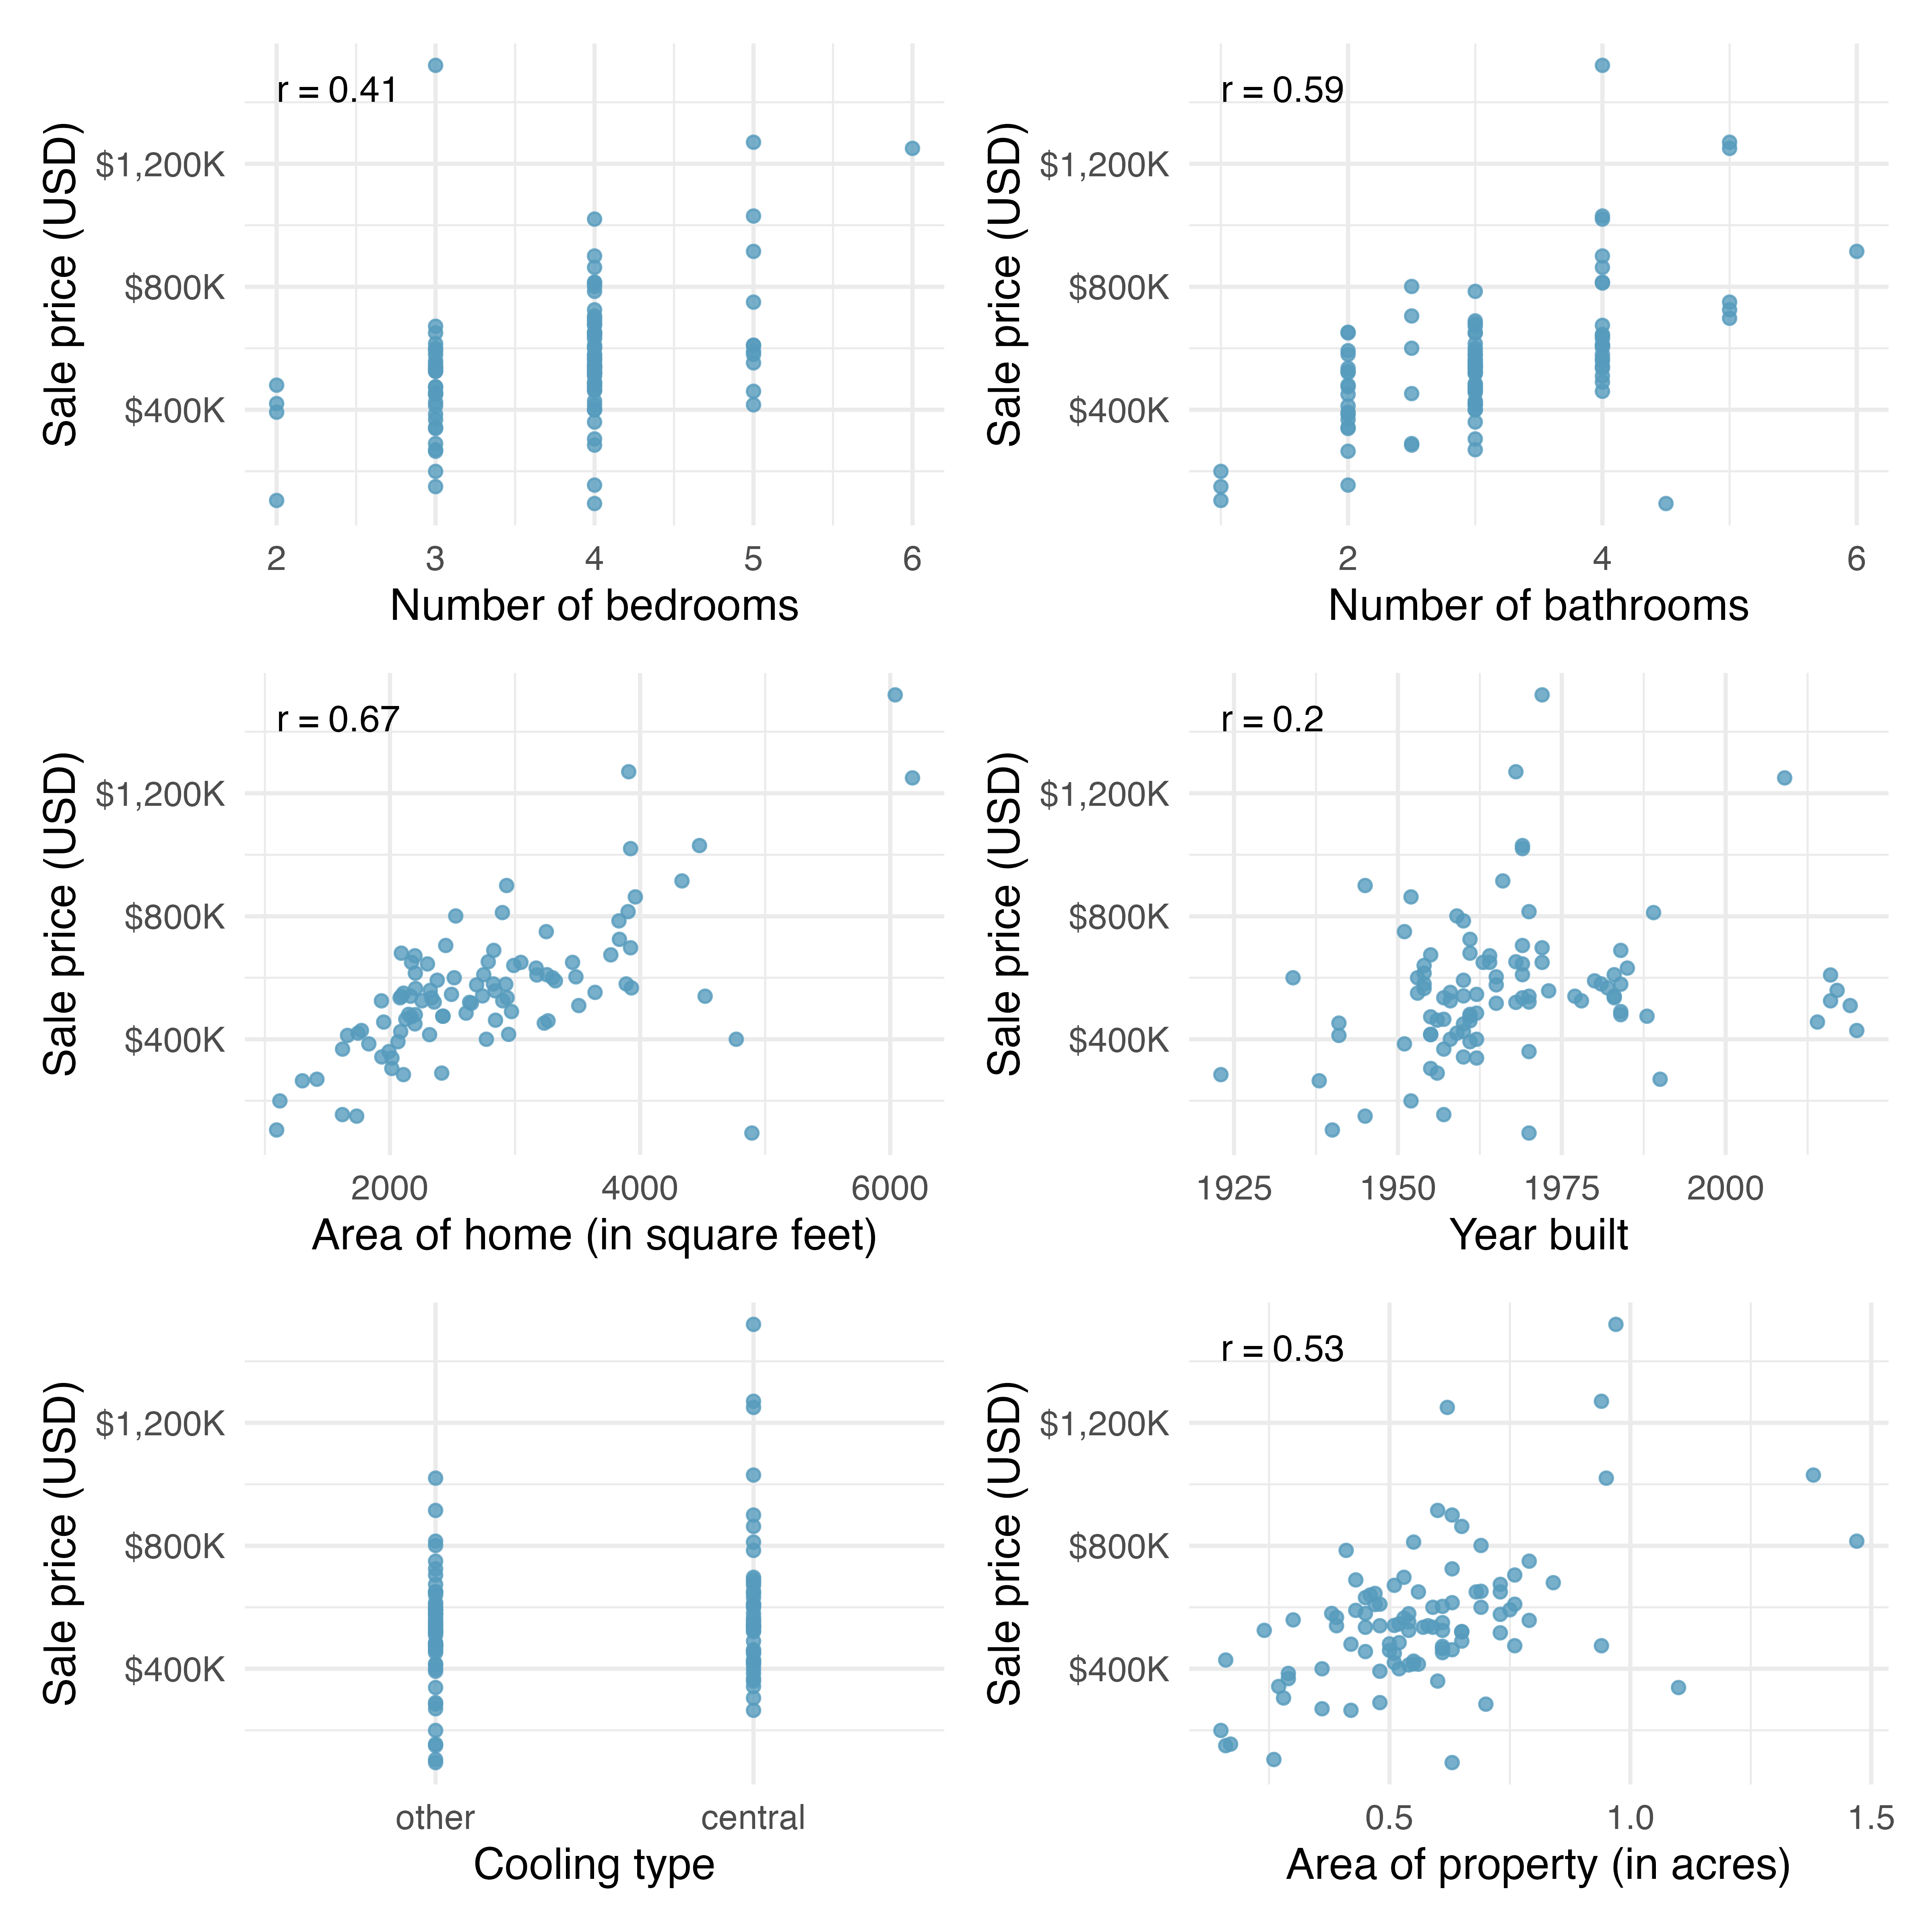 Scatter plots describing six different predictor variables' relationship with the price of a home.